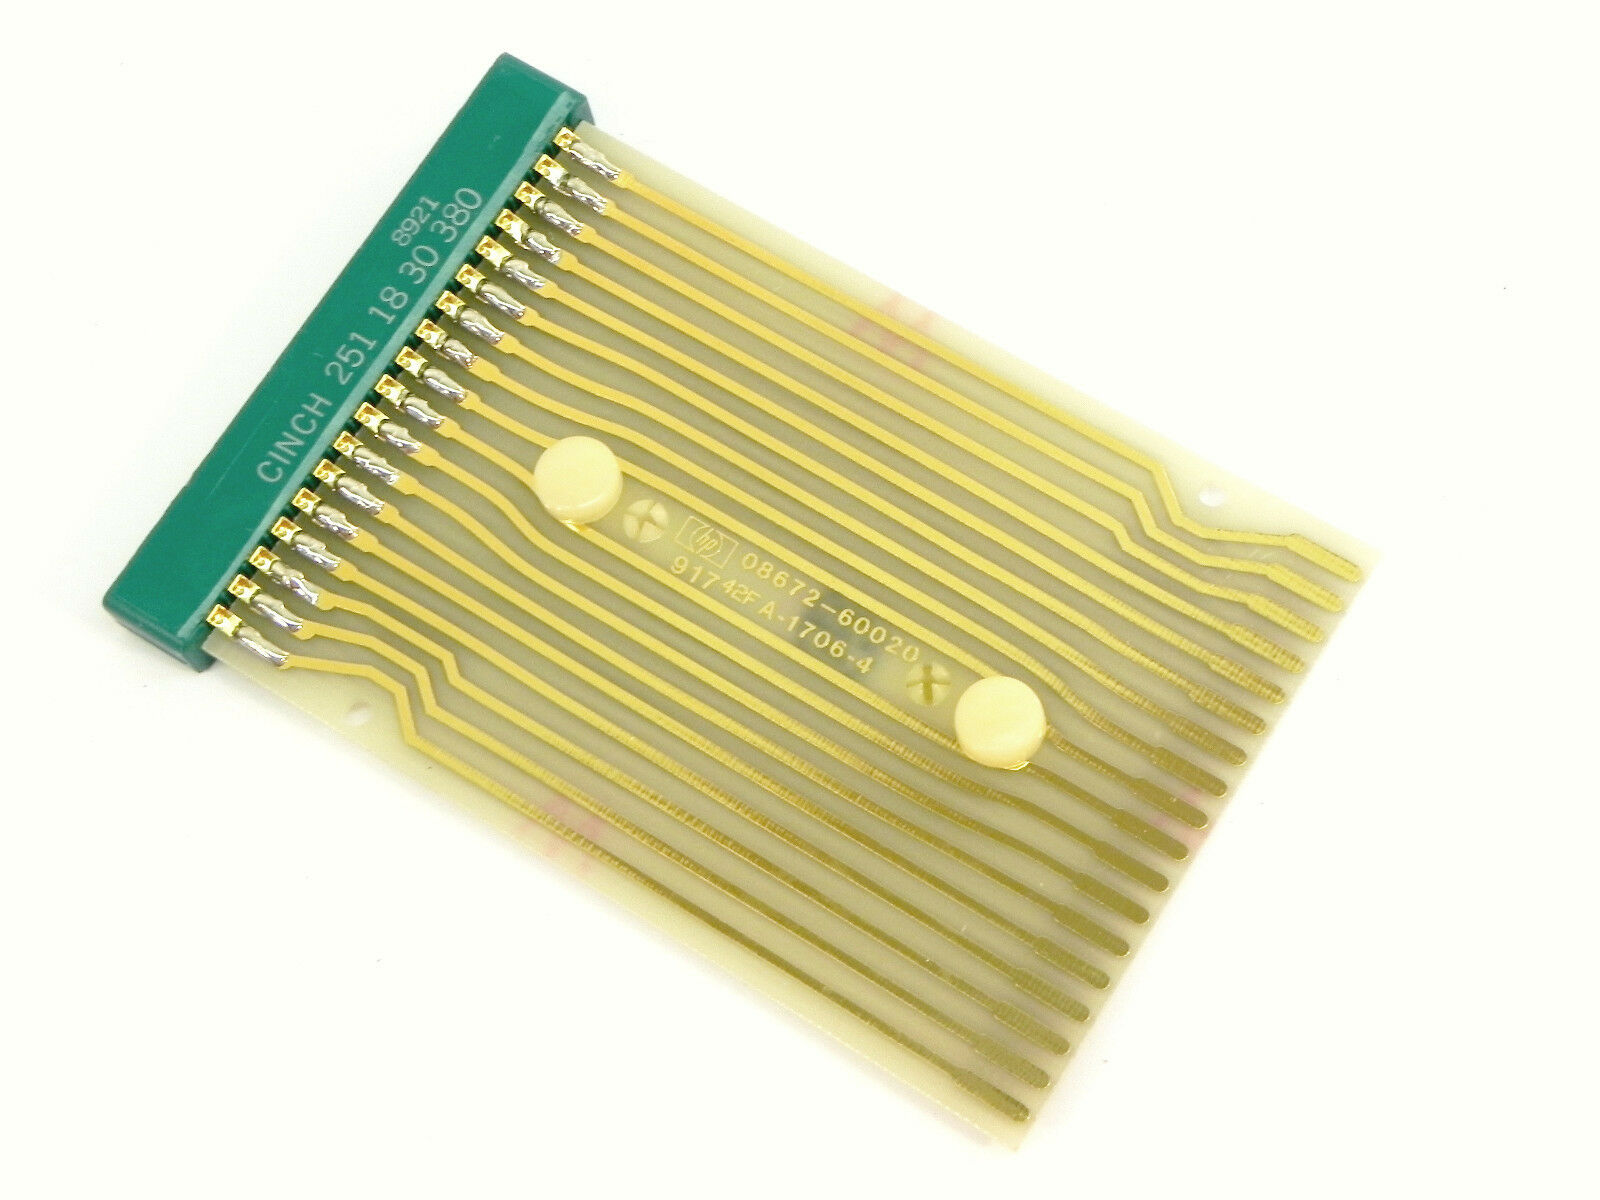 HP 08662-60275 EXTENDER CARD FOR HP and Agilent Equiment 